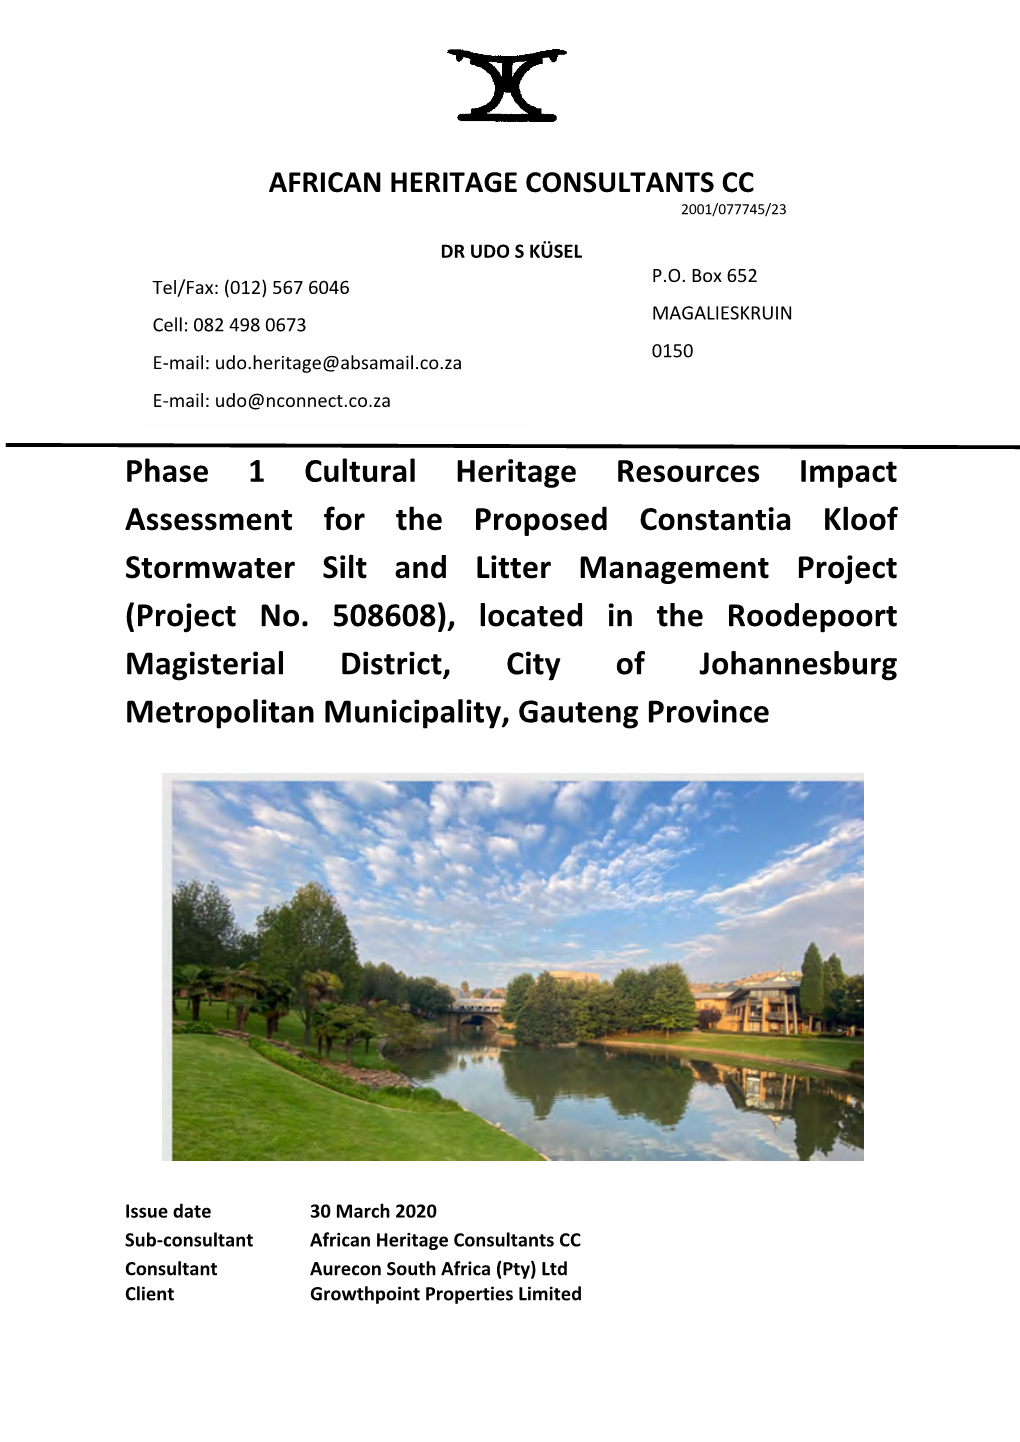 Phase 1 Cultural Heritage Resources Impact Assessment for the Proposed Constantia Kloof Stormwater Silt and Litter Management Project (Project No